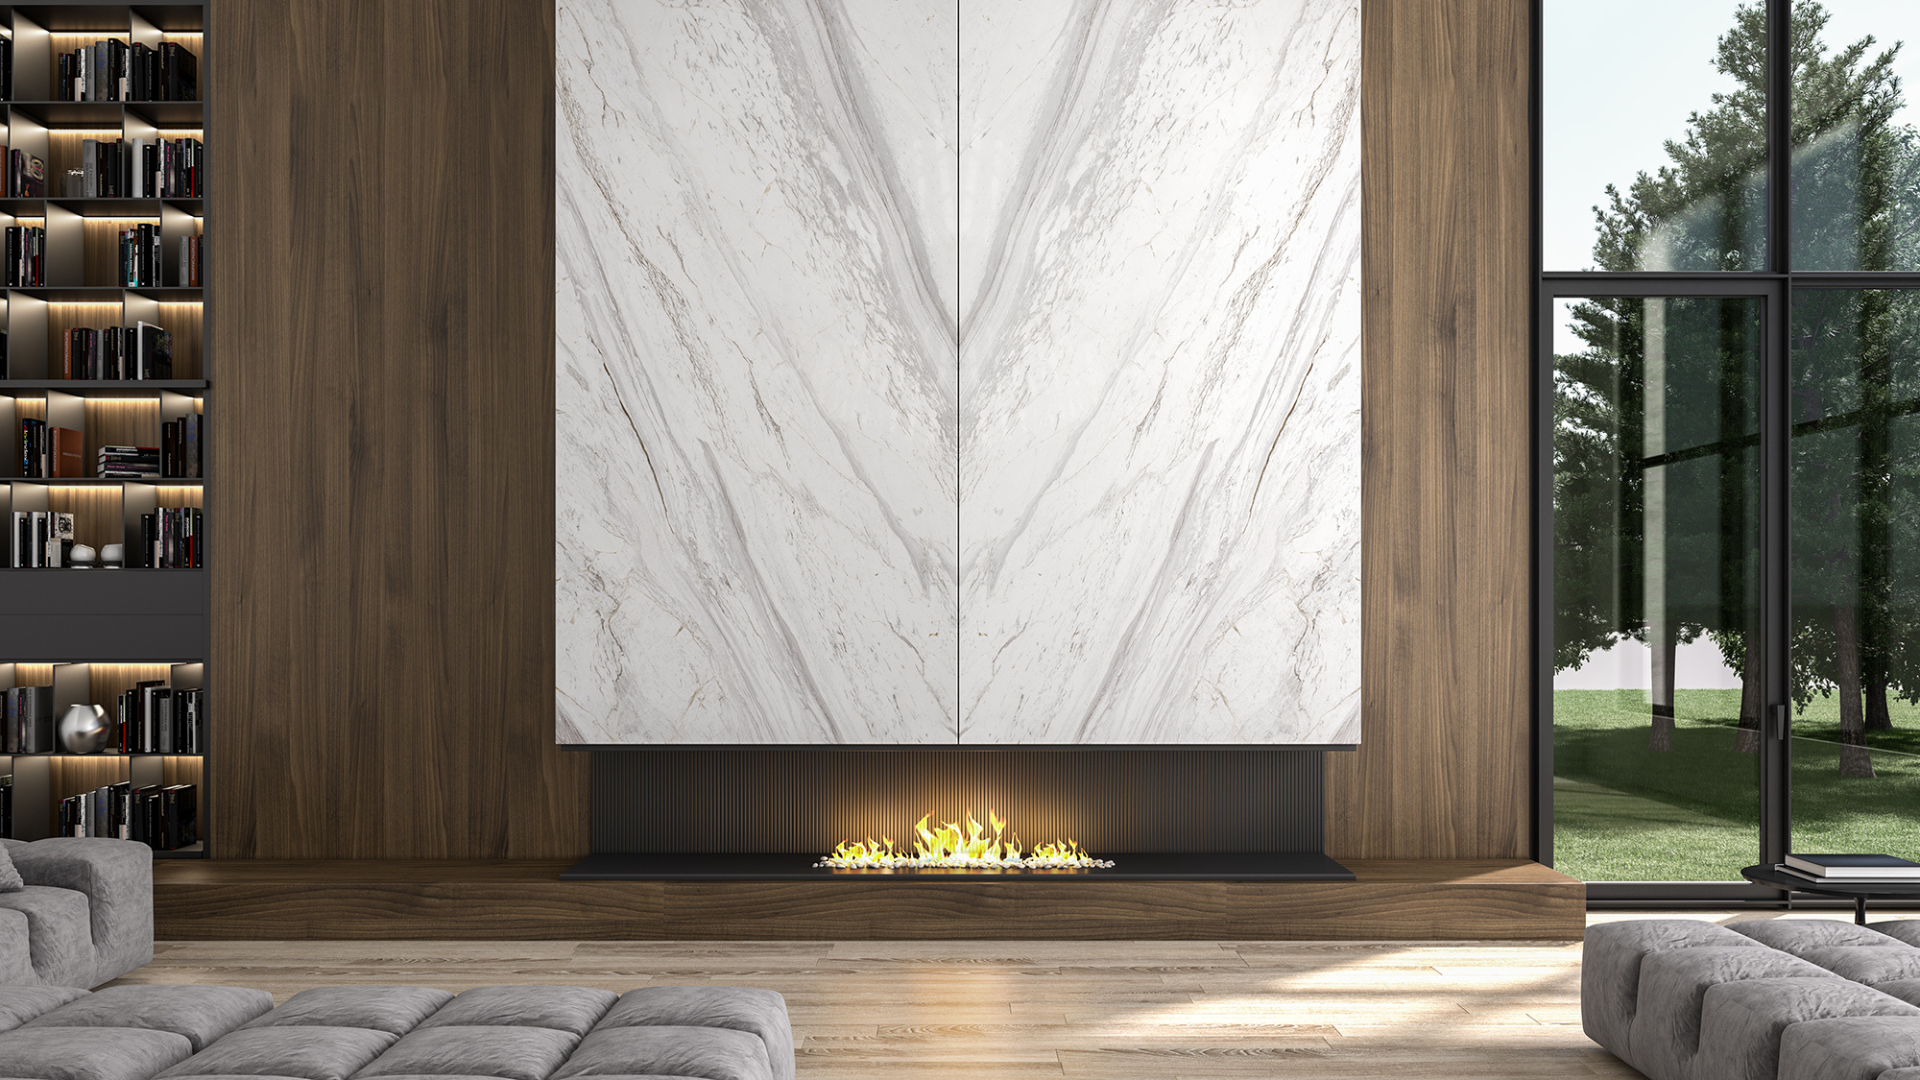 Cozy living room rendering with white marble with light grey veins, in wall cladding with the book matching method, minimal design